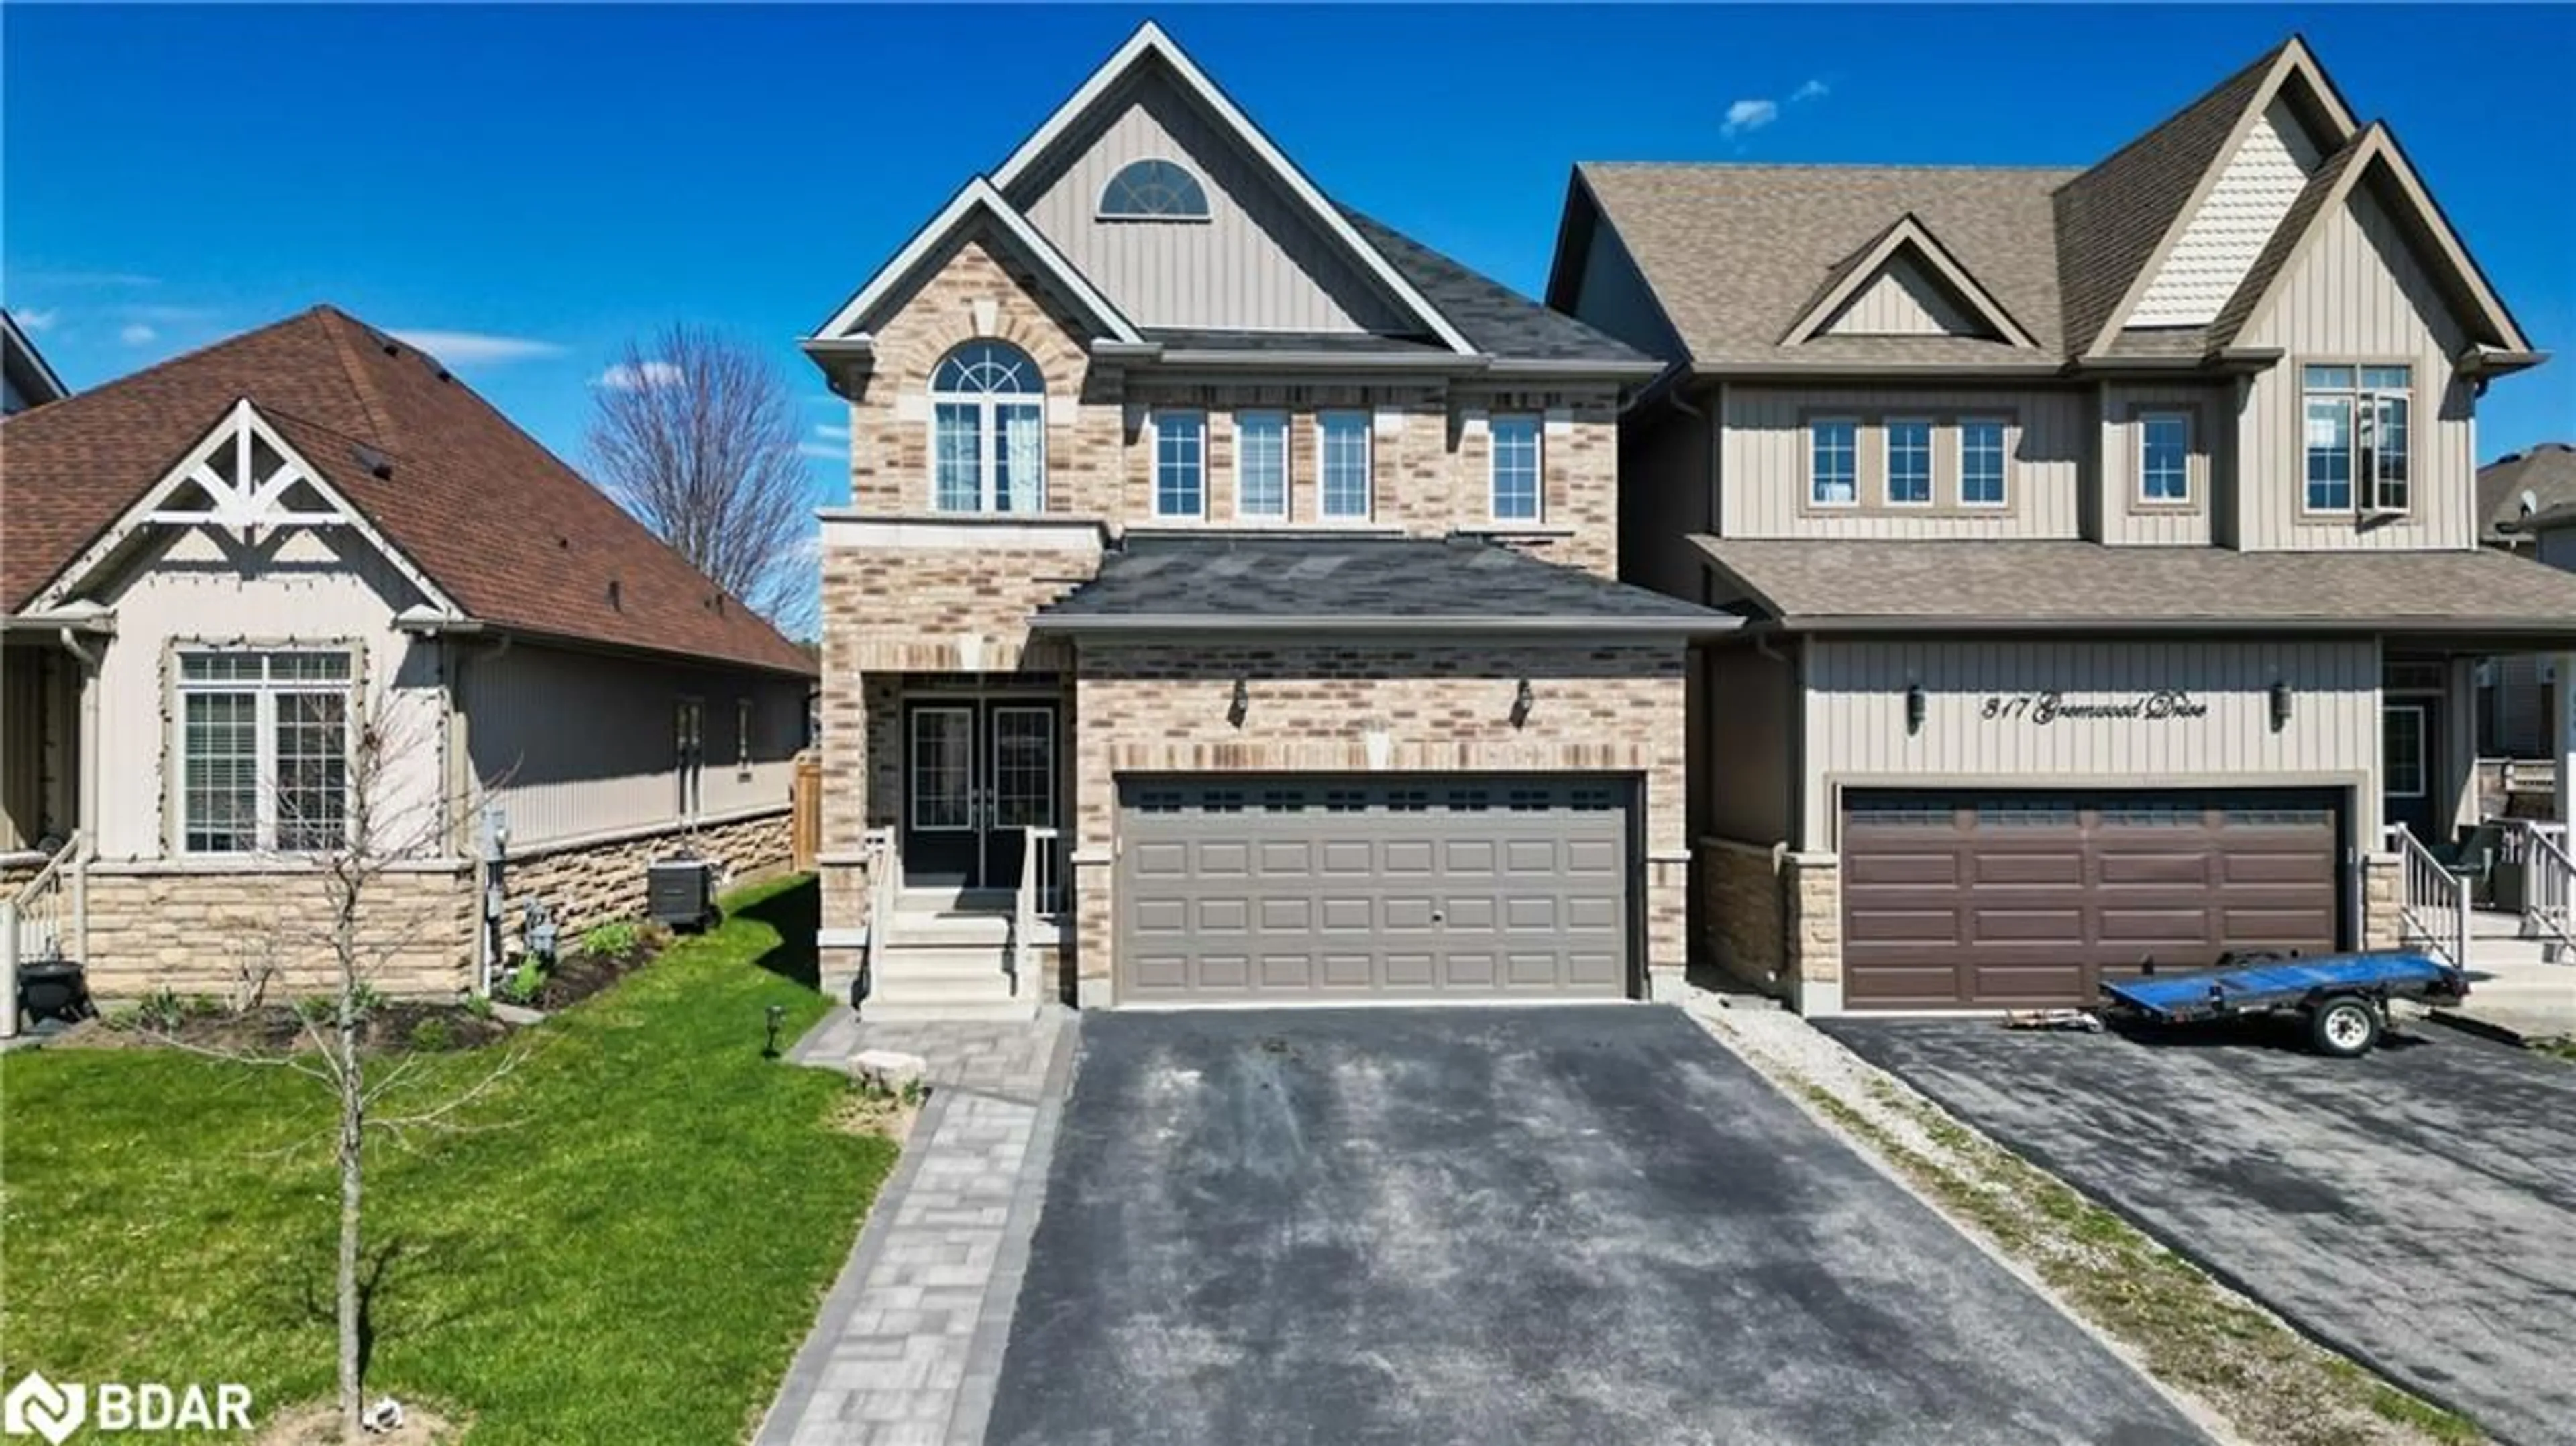 Home with brick exterior material for 315 Greenwood Dr, Essa Ontario L3W 038